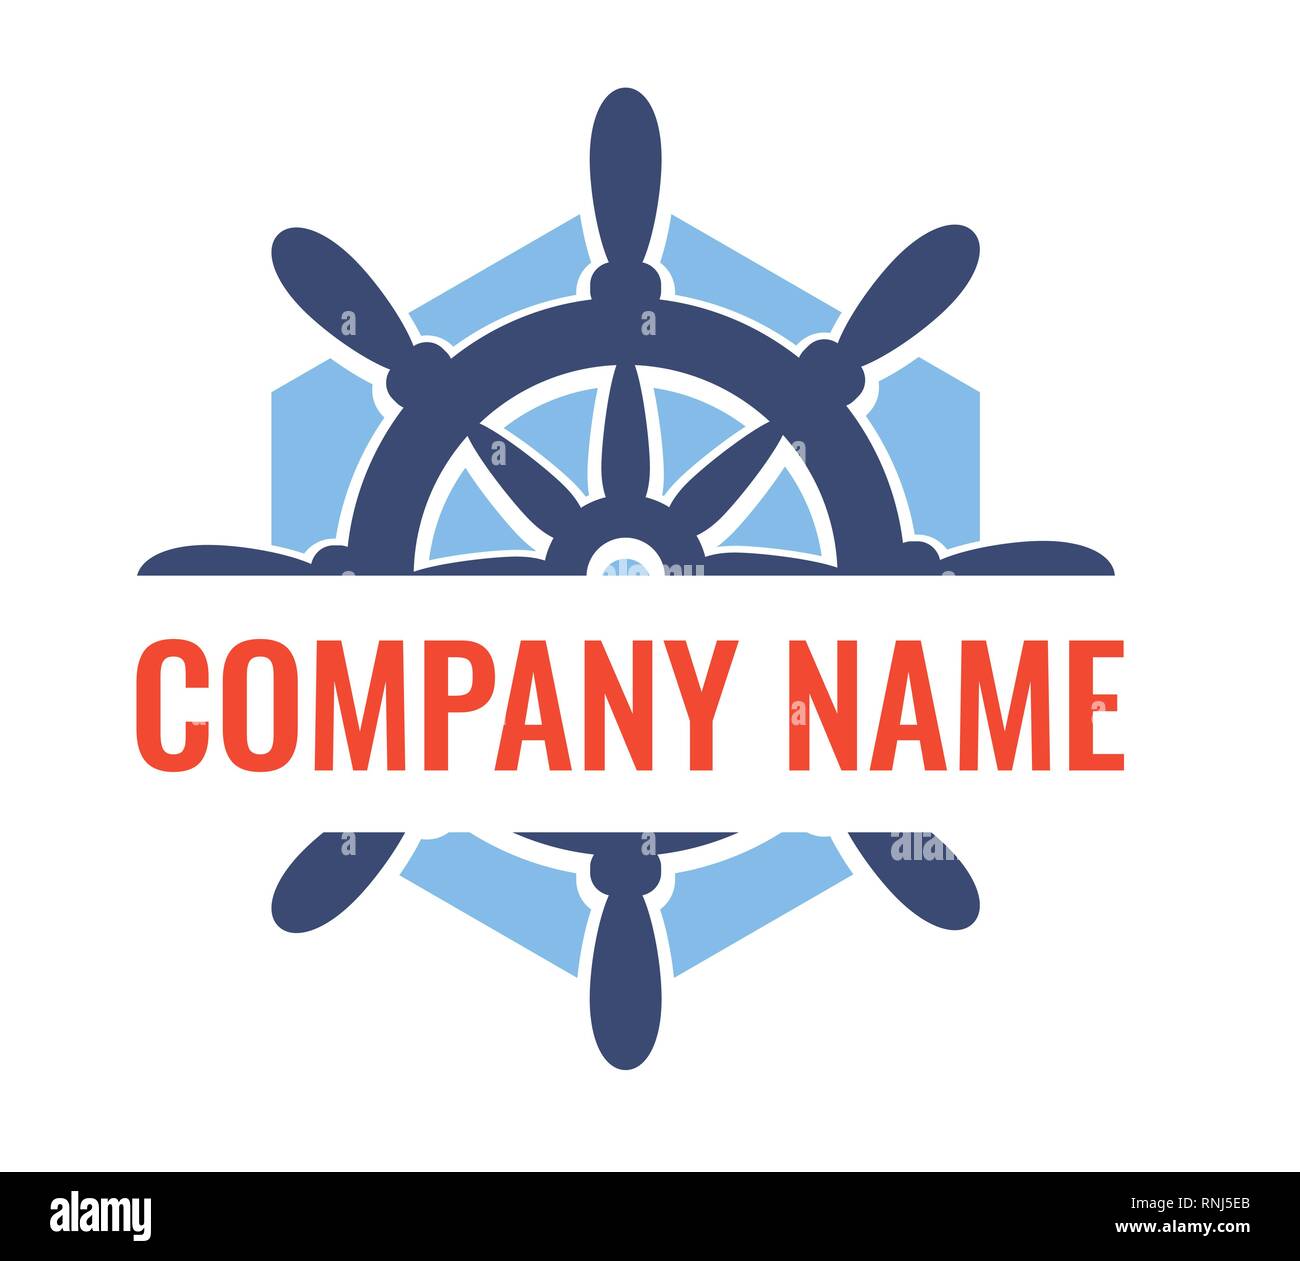 Ship Steering Wheel badge for travel company. Vector illustration isolated on white. Logo symbol for strong business company that appreciates style. D Stock Vector